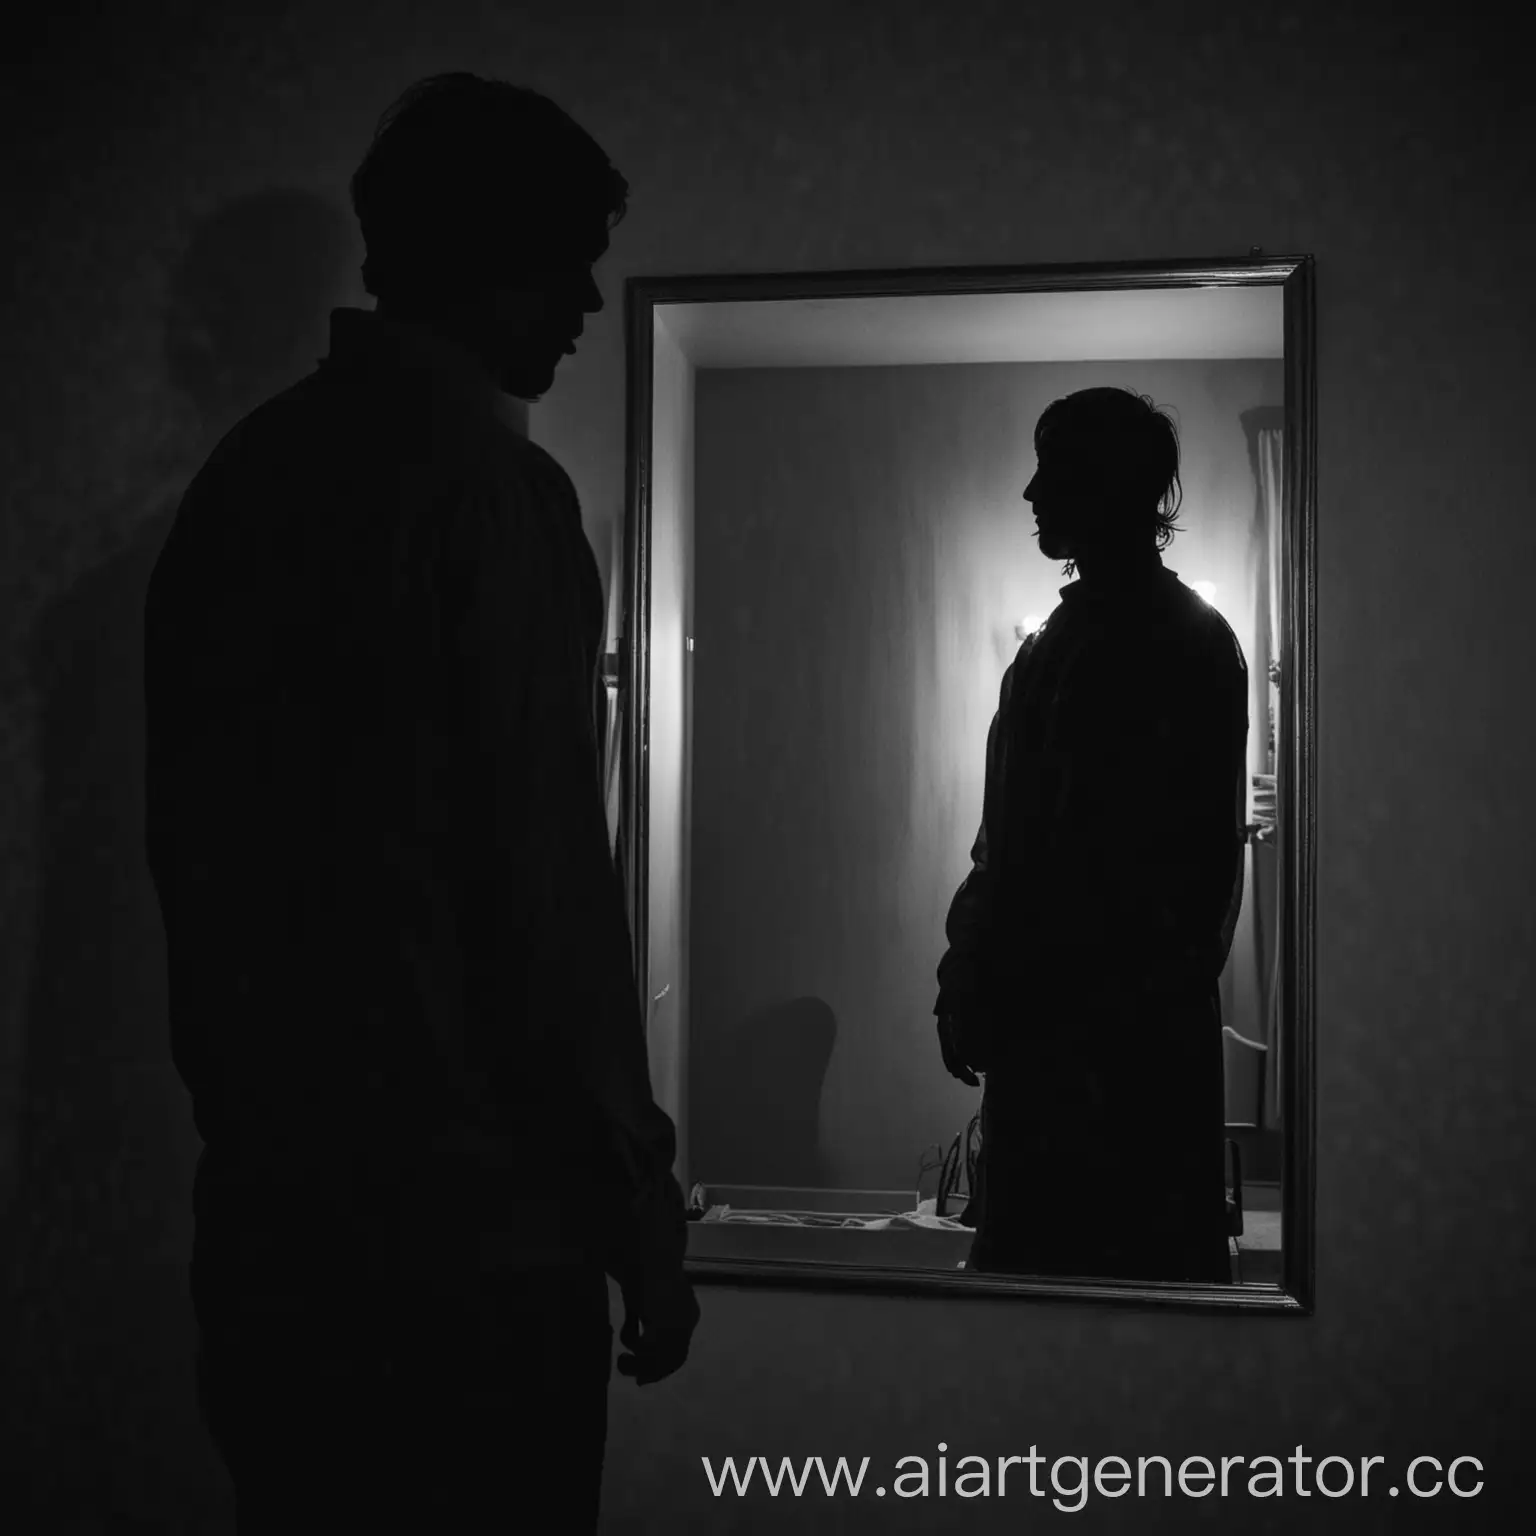 A man looks in the mirror, there is only his shadow in the mirror, there is no face, only a silhouette, it is dark, scary